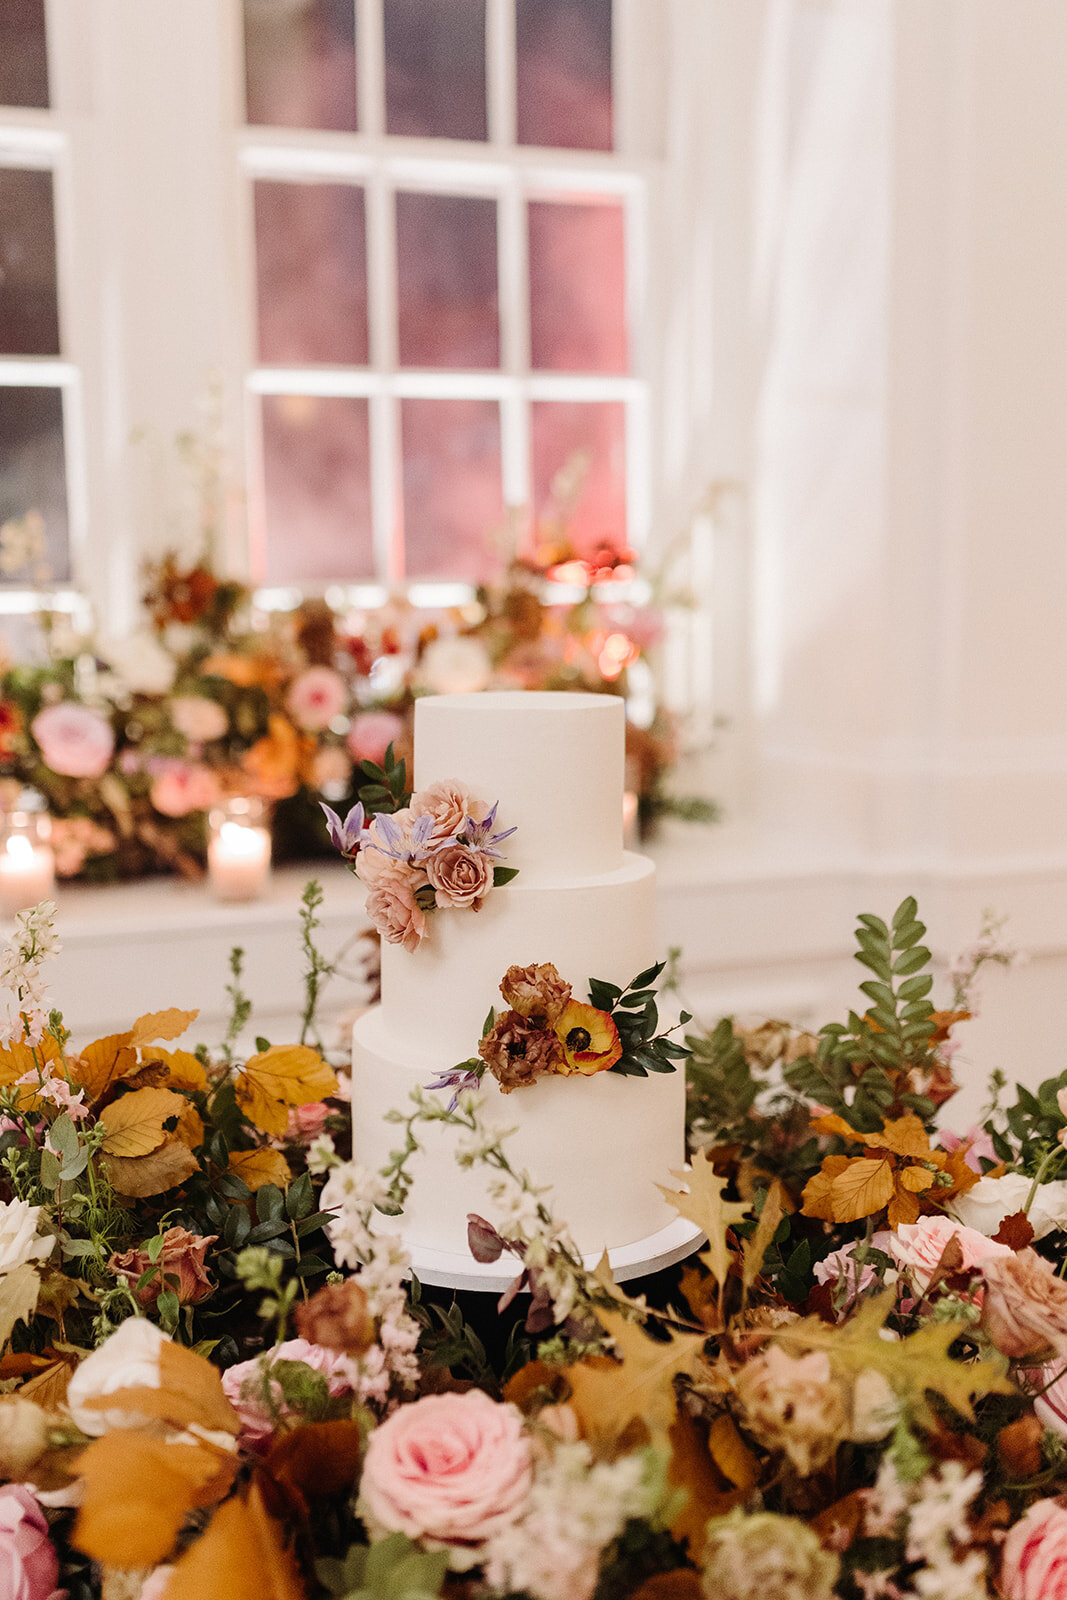 Lush floral meadows surround the cake at this Parisian inspired fall wedding with hues of dusty rose, terra cotta, mauve, copper, and lavender composed of roses, ranunculus, copper beech, clematis, and fall foliage. Design by Rosemary and Finch in Nashville, TN.